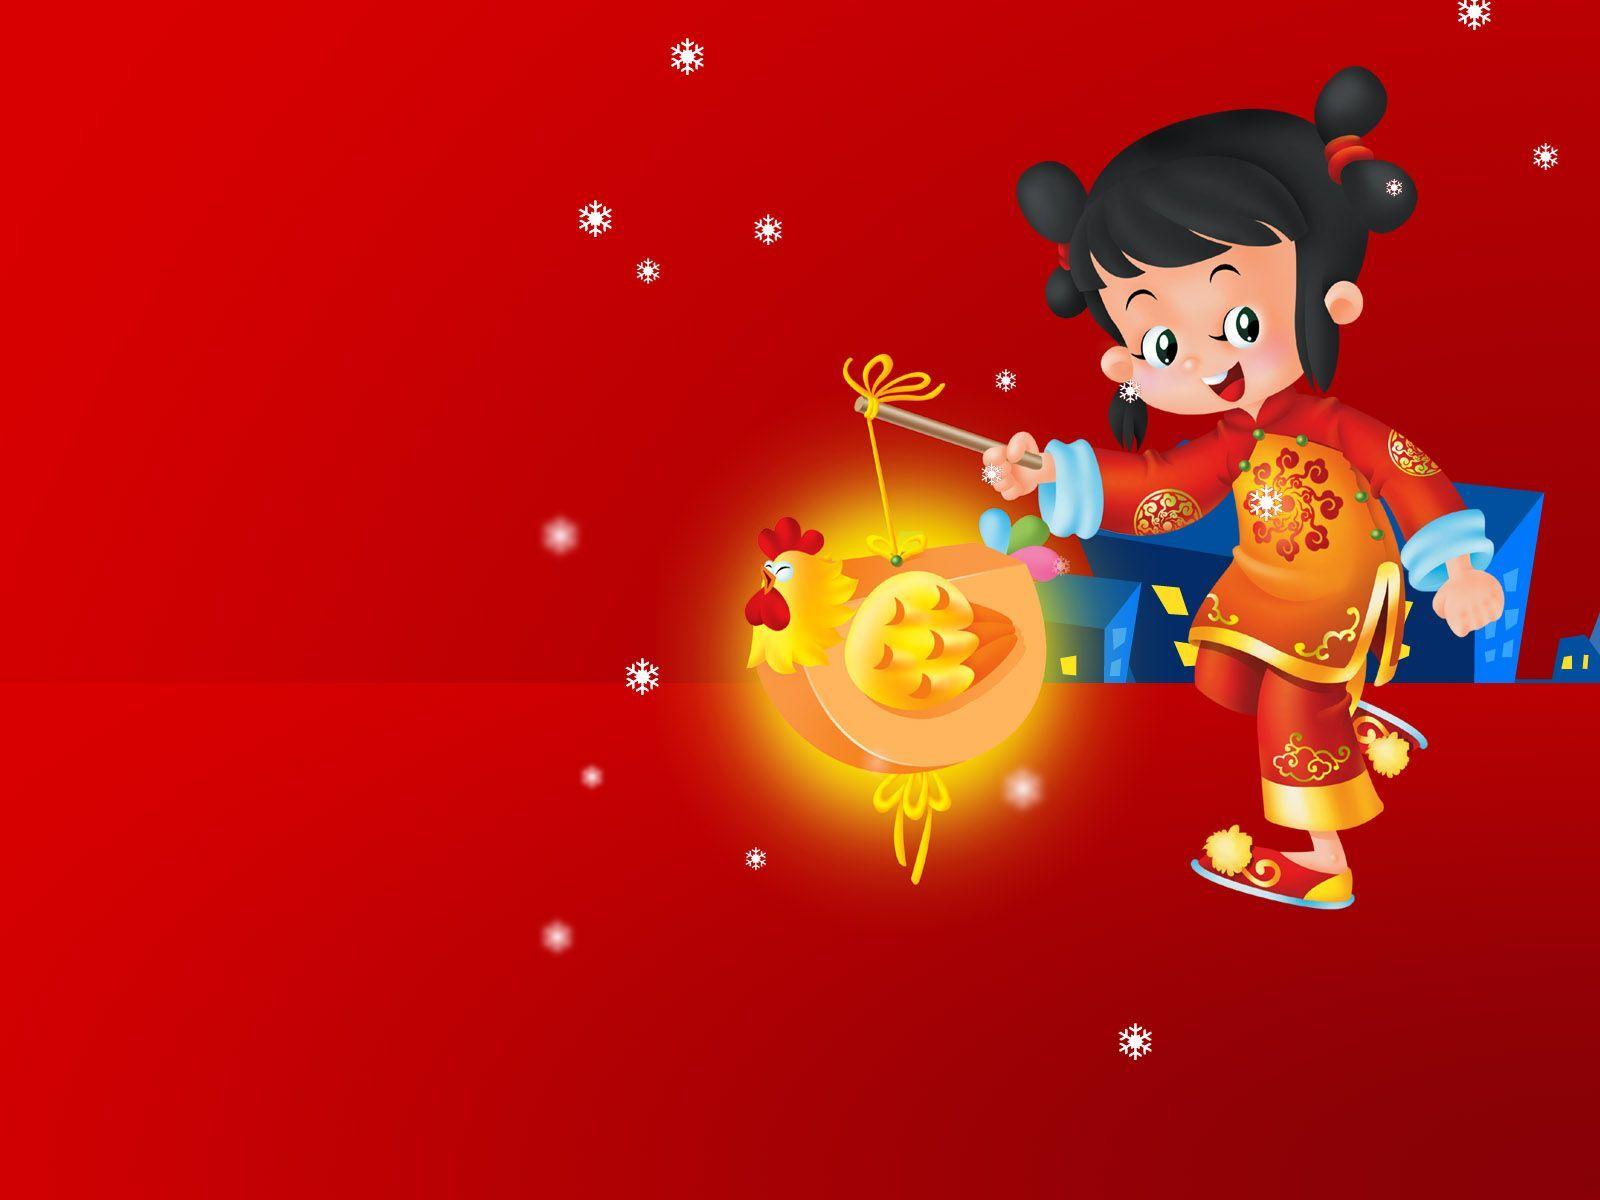 Chinese New Year 2014 Desktop Wallpaper, High Definition, High Quality, Widescreen